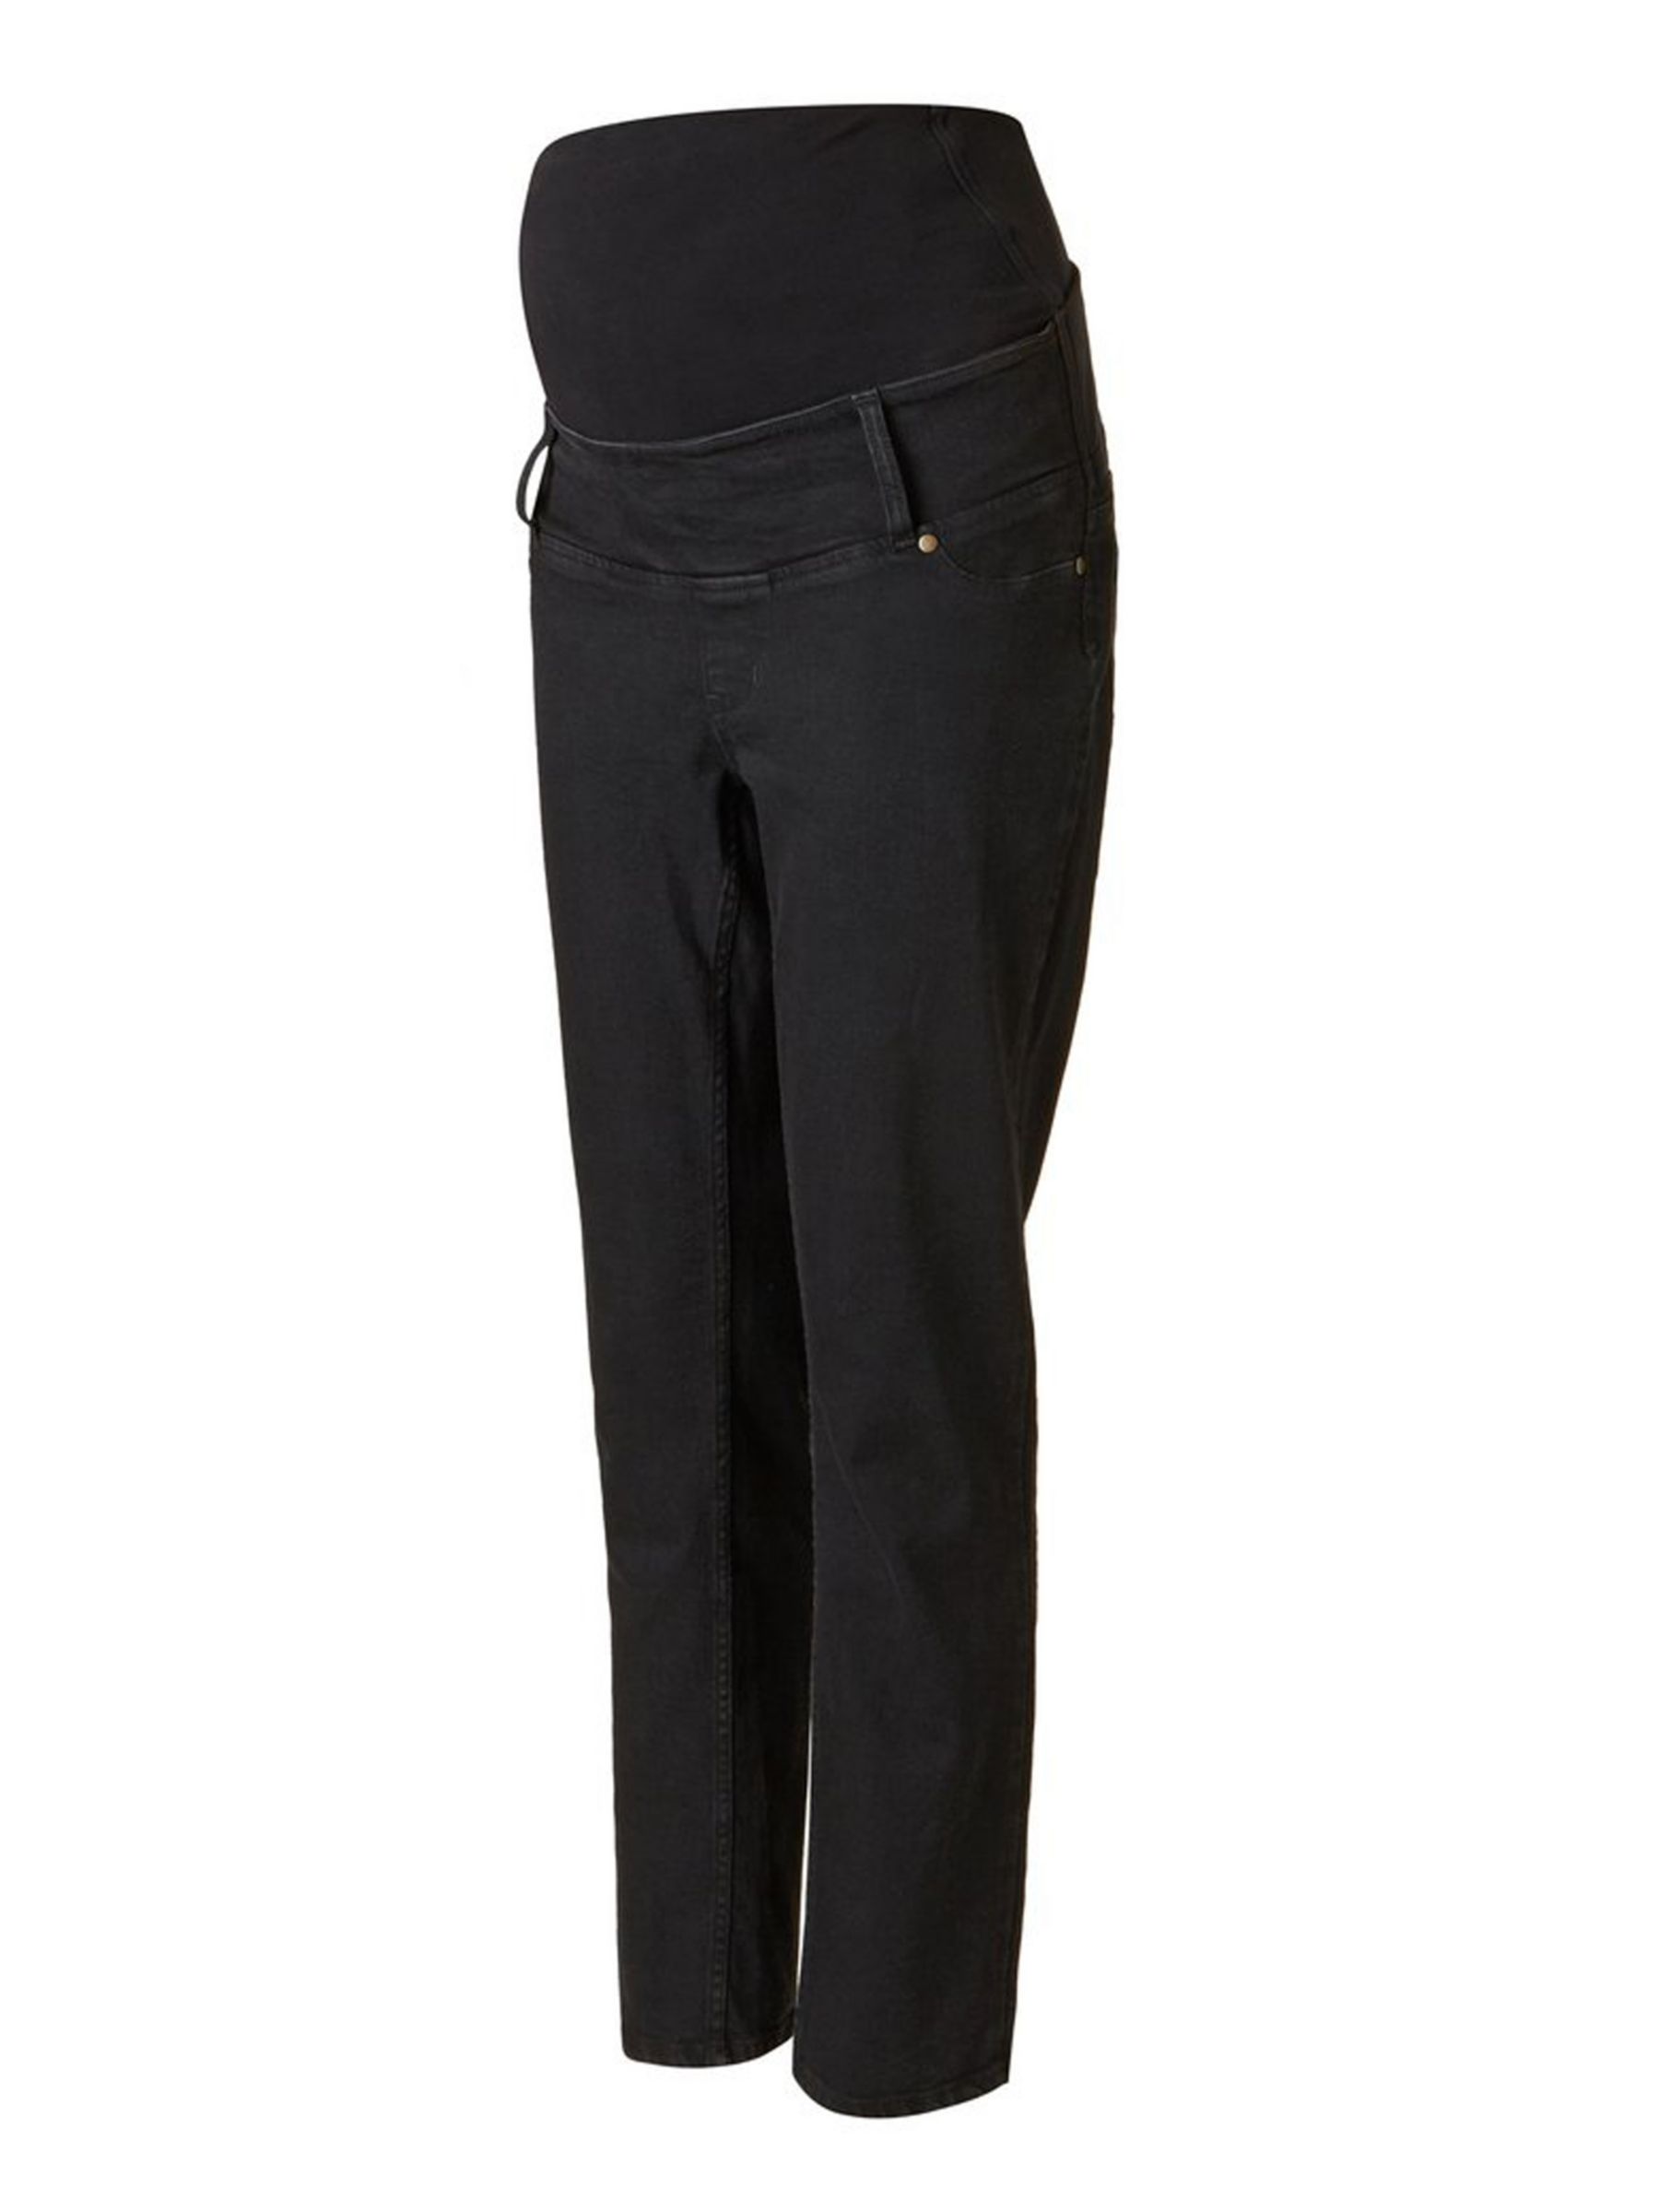 Buy Isabella Oliver Over Bump Boyfriend Cut Maternity Jeans Online at johnlewis.com